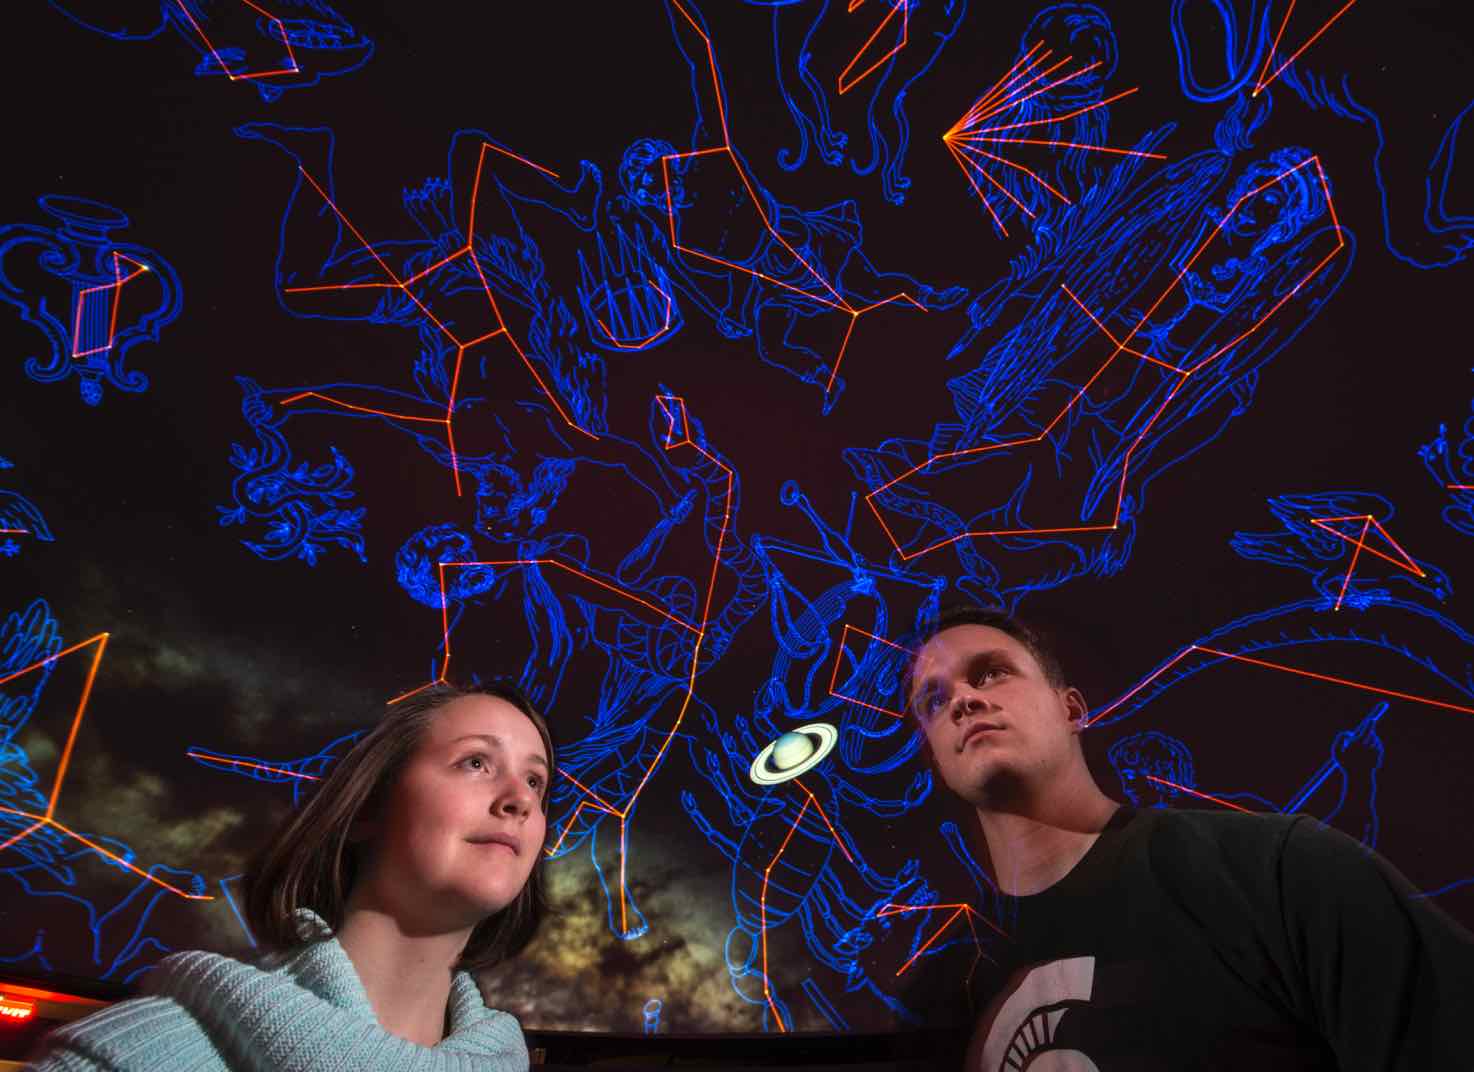 People gaze at constellations on the ceiling of the planetarium)